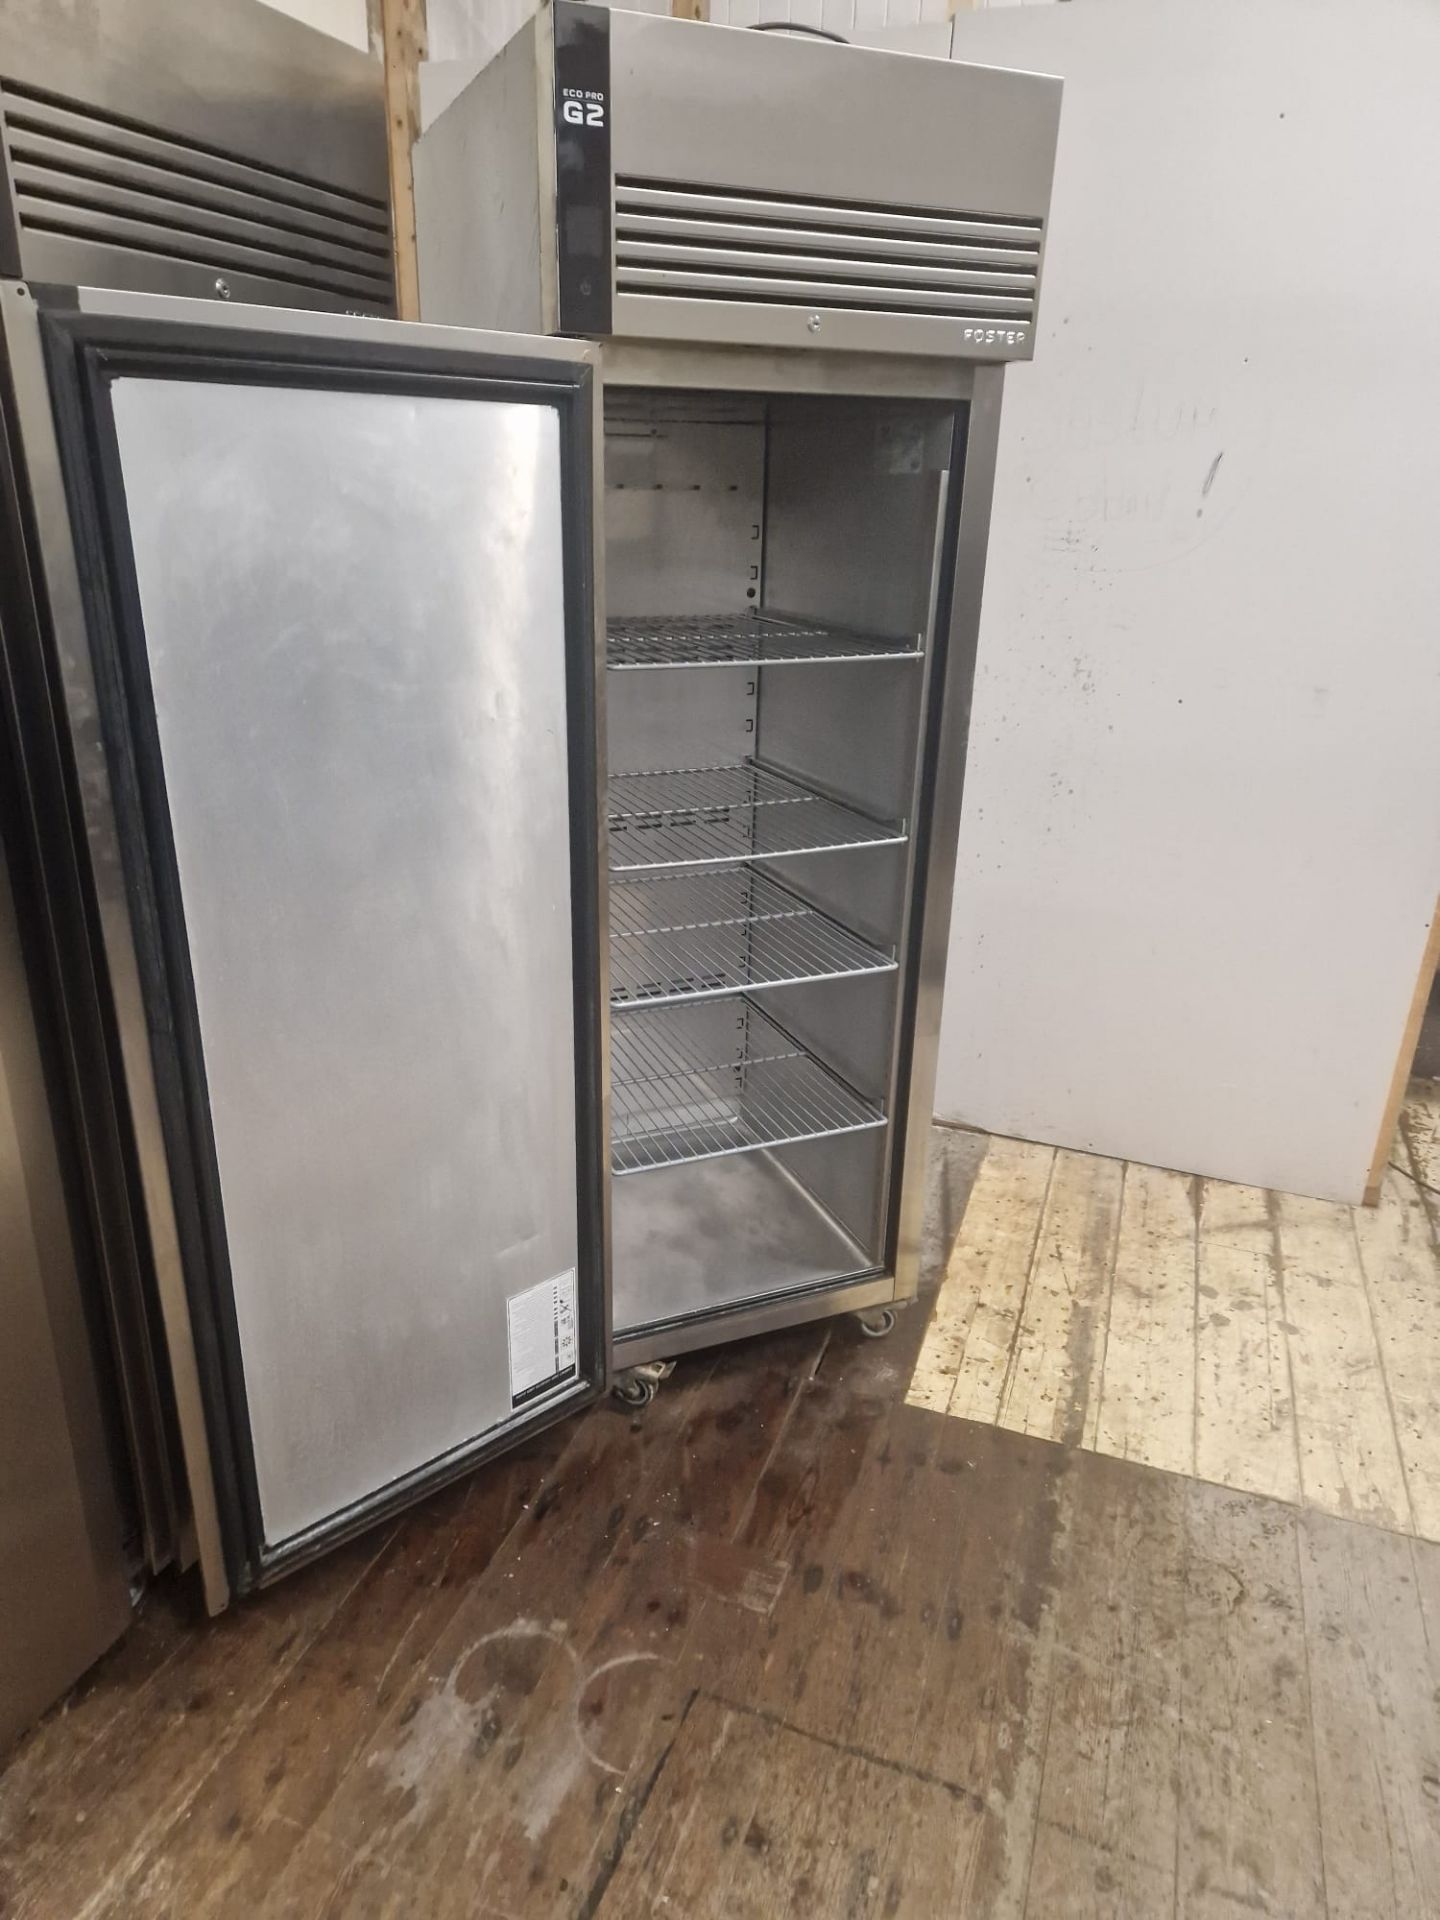 FOSTER G2 UPRIGHT FRIDGE +1 +4 - 600 LITRE STAINLESS STEEL - FULLY WORKING AND SERVICED  - Image 2 of 3